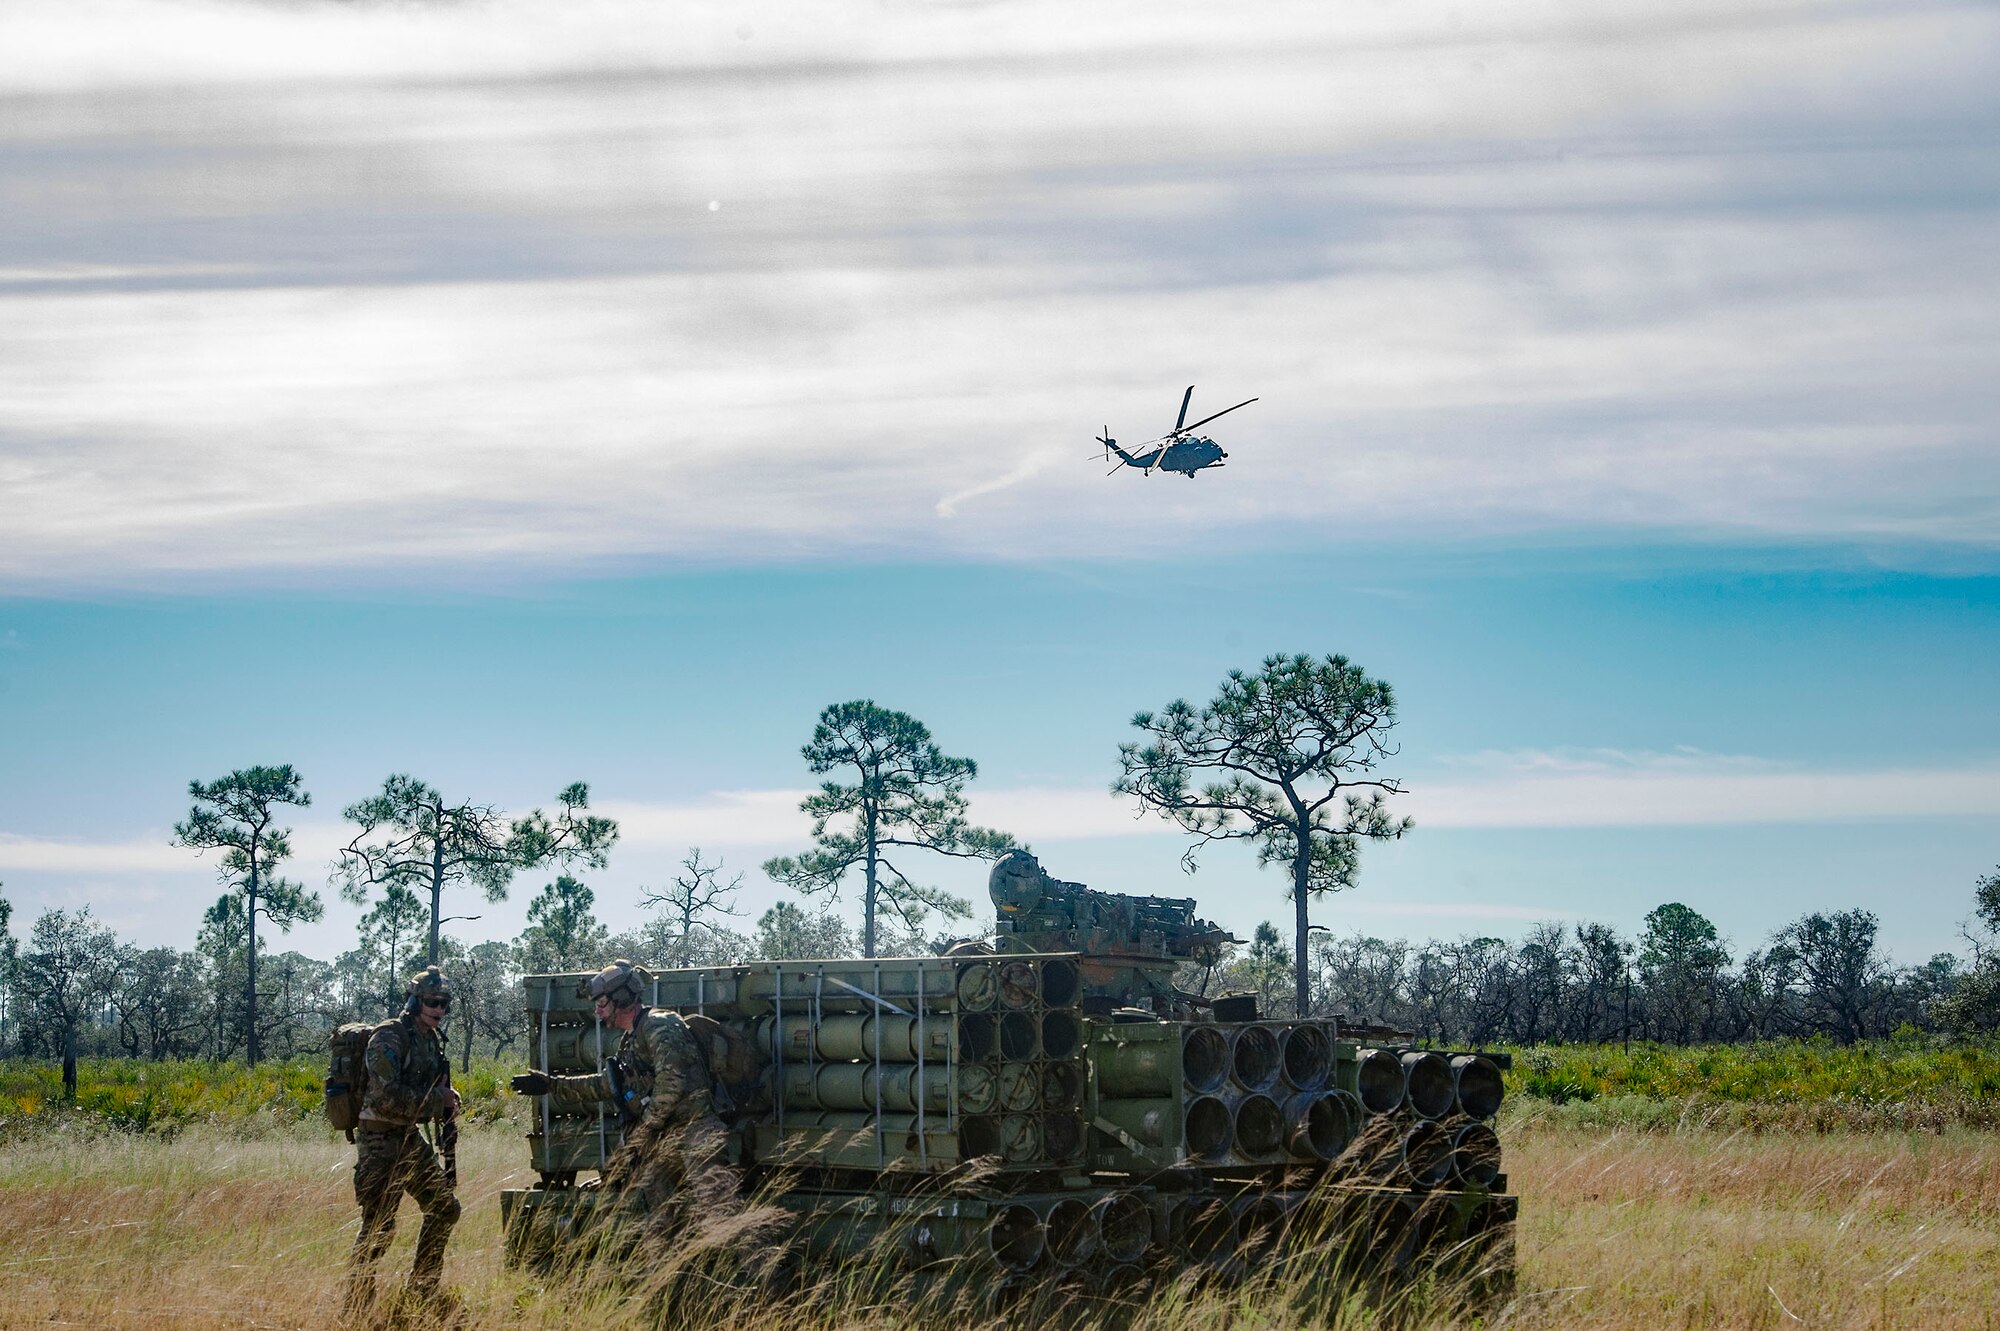 Pararescuemen from the 38th Rescue Squadron position themselves on a mock battlefield during a pre-deployment ‘spin-up’ exercise, Dec. 12, 2018, at Avon Park Air Force Range, Fla. During this pre-deployment ‘spin-up’ training, Moody’s 347th Rescue Group tested and maximized their combat search and rescue (CSAR) and personnel recovery capabilities. Under normal circumstances, the HH-60G Pave Hawk helicopter crews and maintainers deploy from Moody and integrate with Guardian Angel teams from different bases. This time, Moody’s 38th RQS and 41st RQS’s will deploy together and utilized this exercise to improve their mission readiness and cohesion before their departure. (U.S. Air Force photo by Senior Airman Greg Nash)